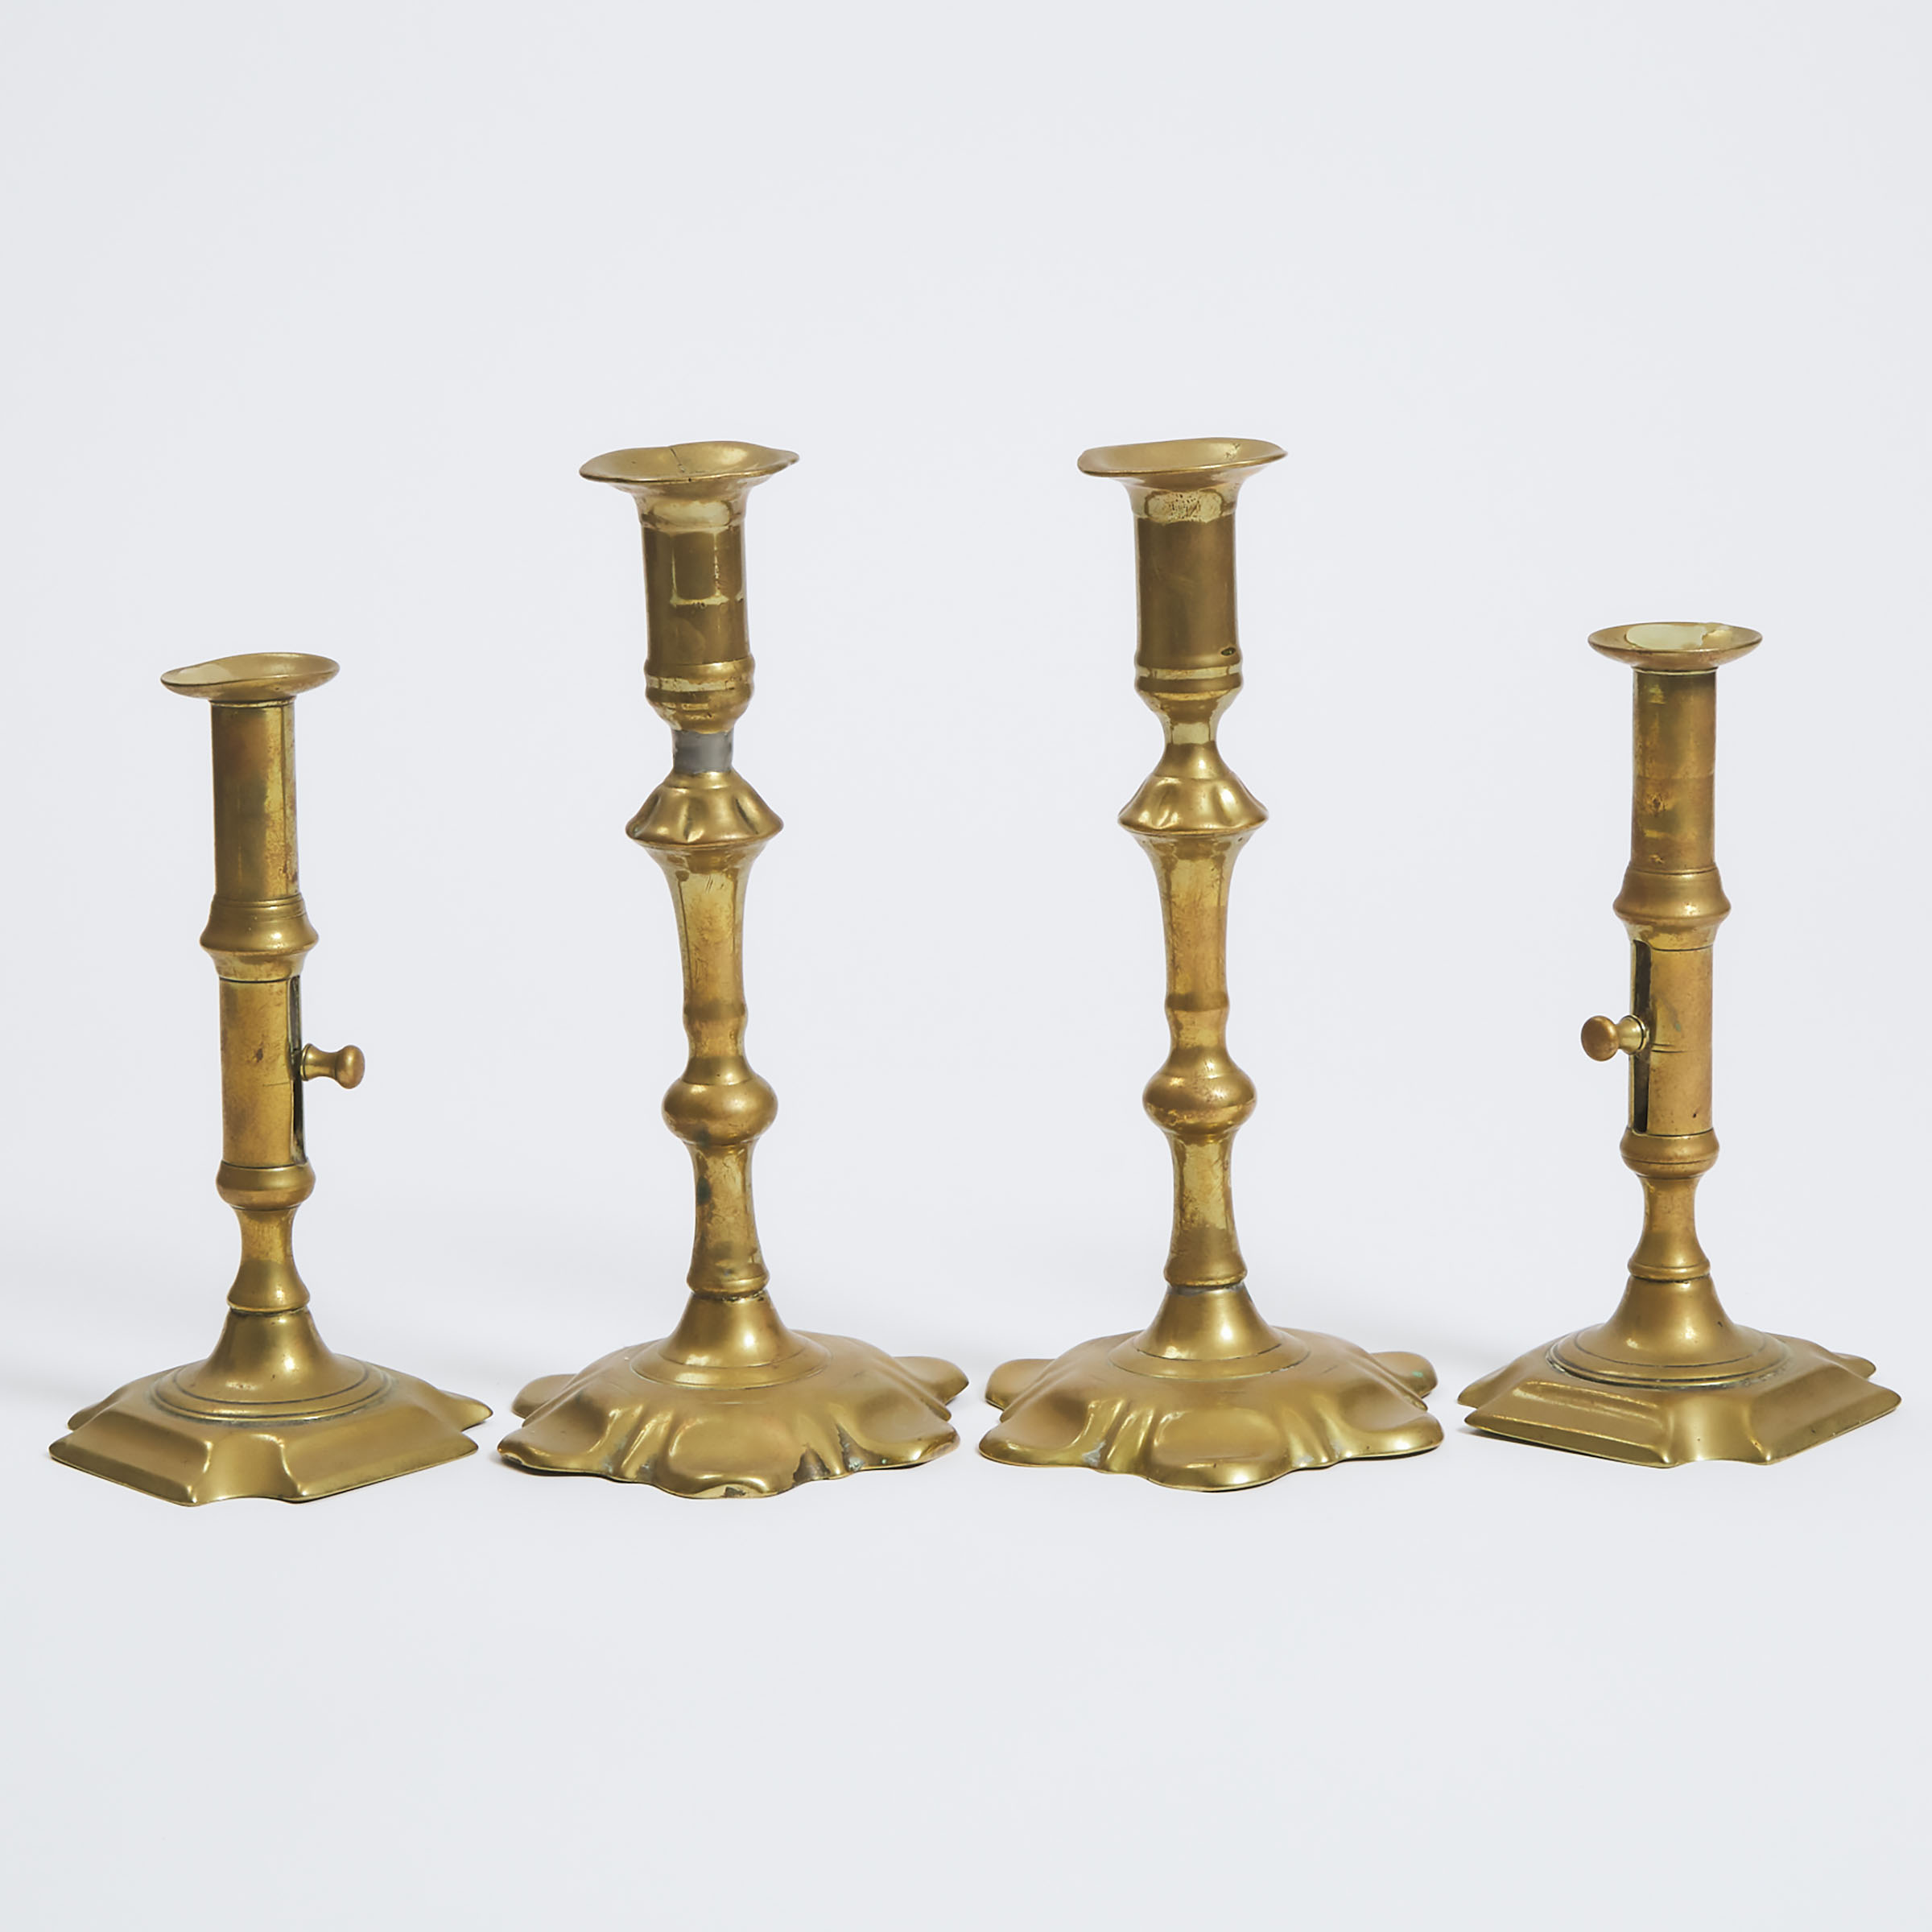 Two Pairs of English Brass Adjustable